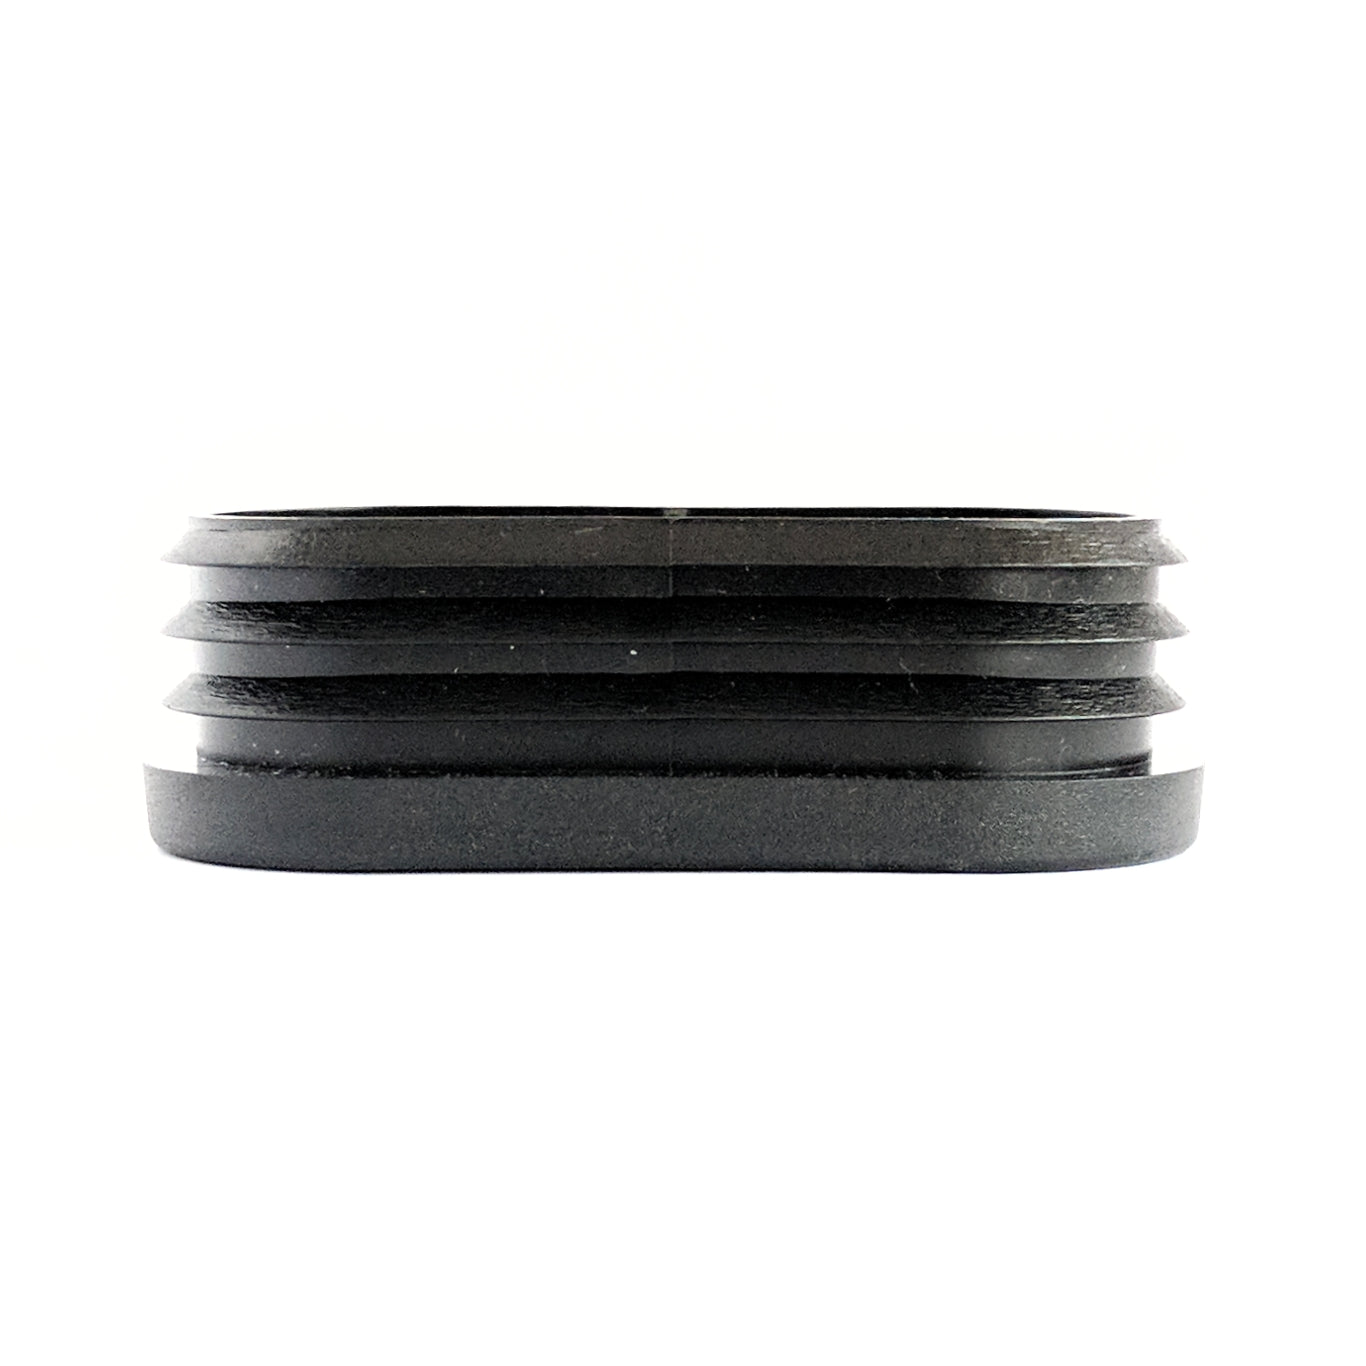 Oval Tube Inserts 60mm x 30mm | Made in Germany | Keay Vital Parts - Keay Vital Parts